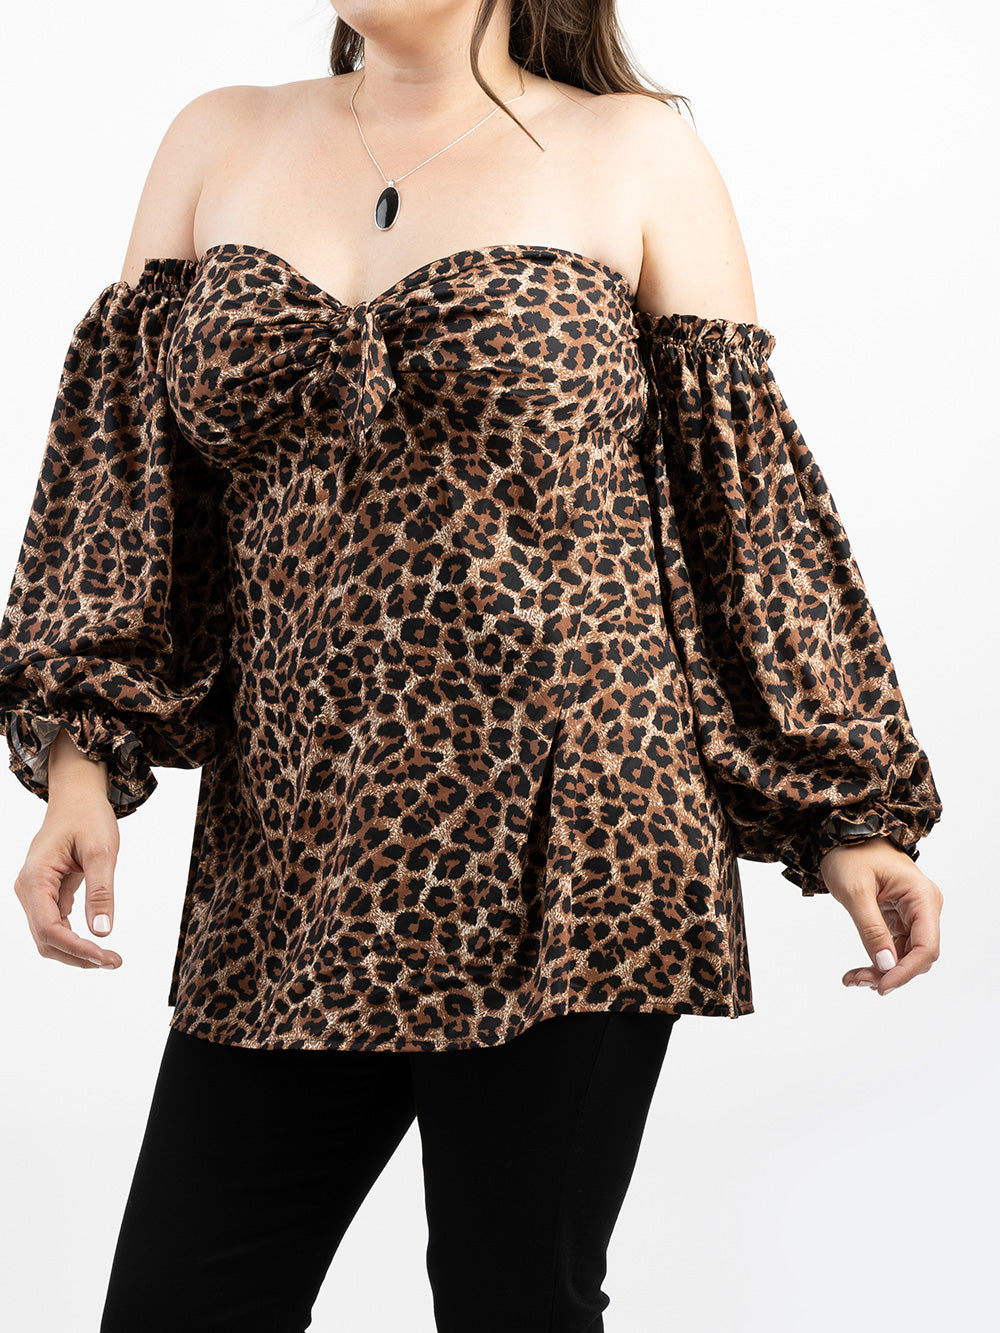 Plus Size Women Leopard Print With Knot Off-Shoulder Sleeve Top - Cowgirl Wear